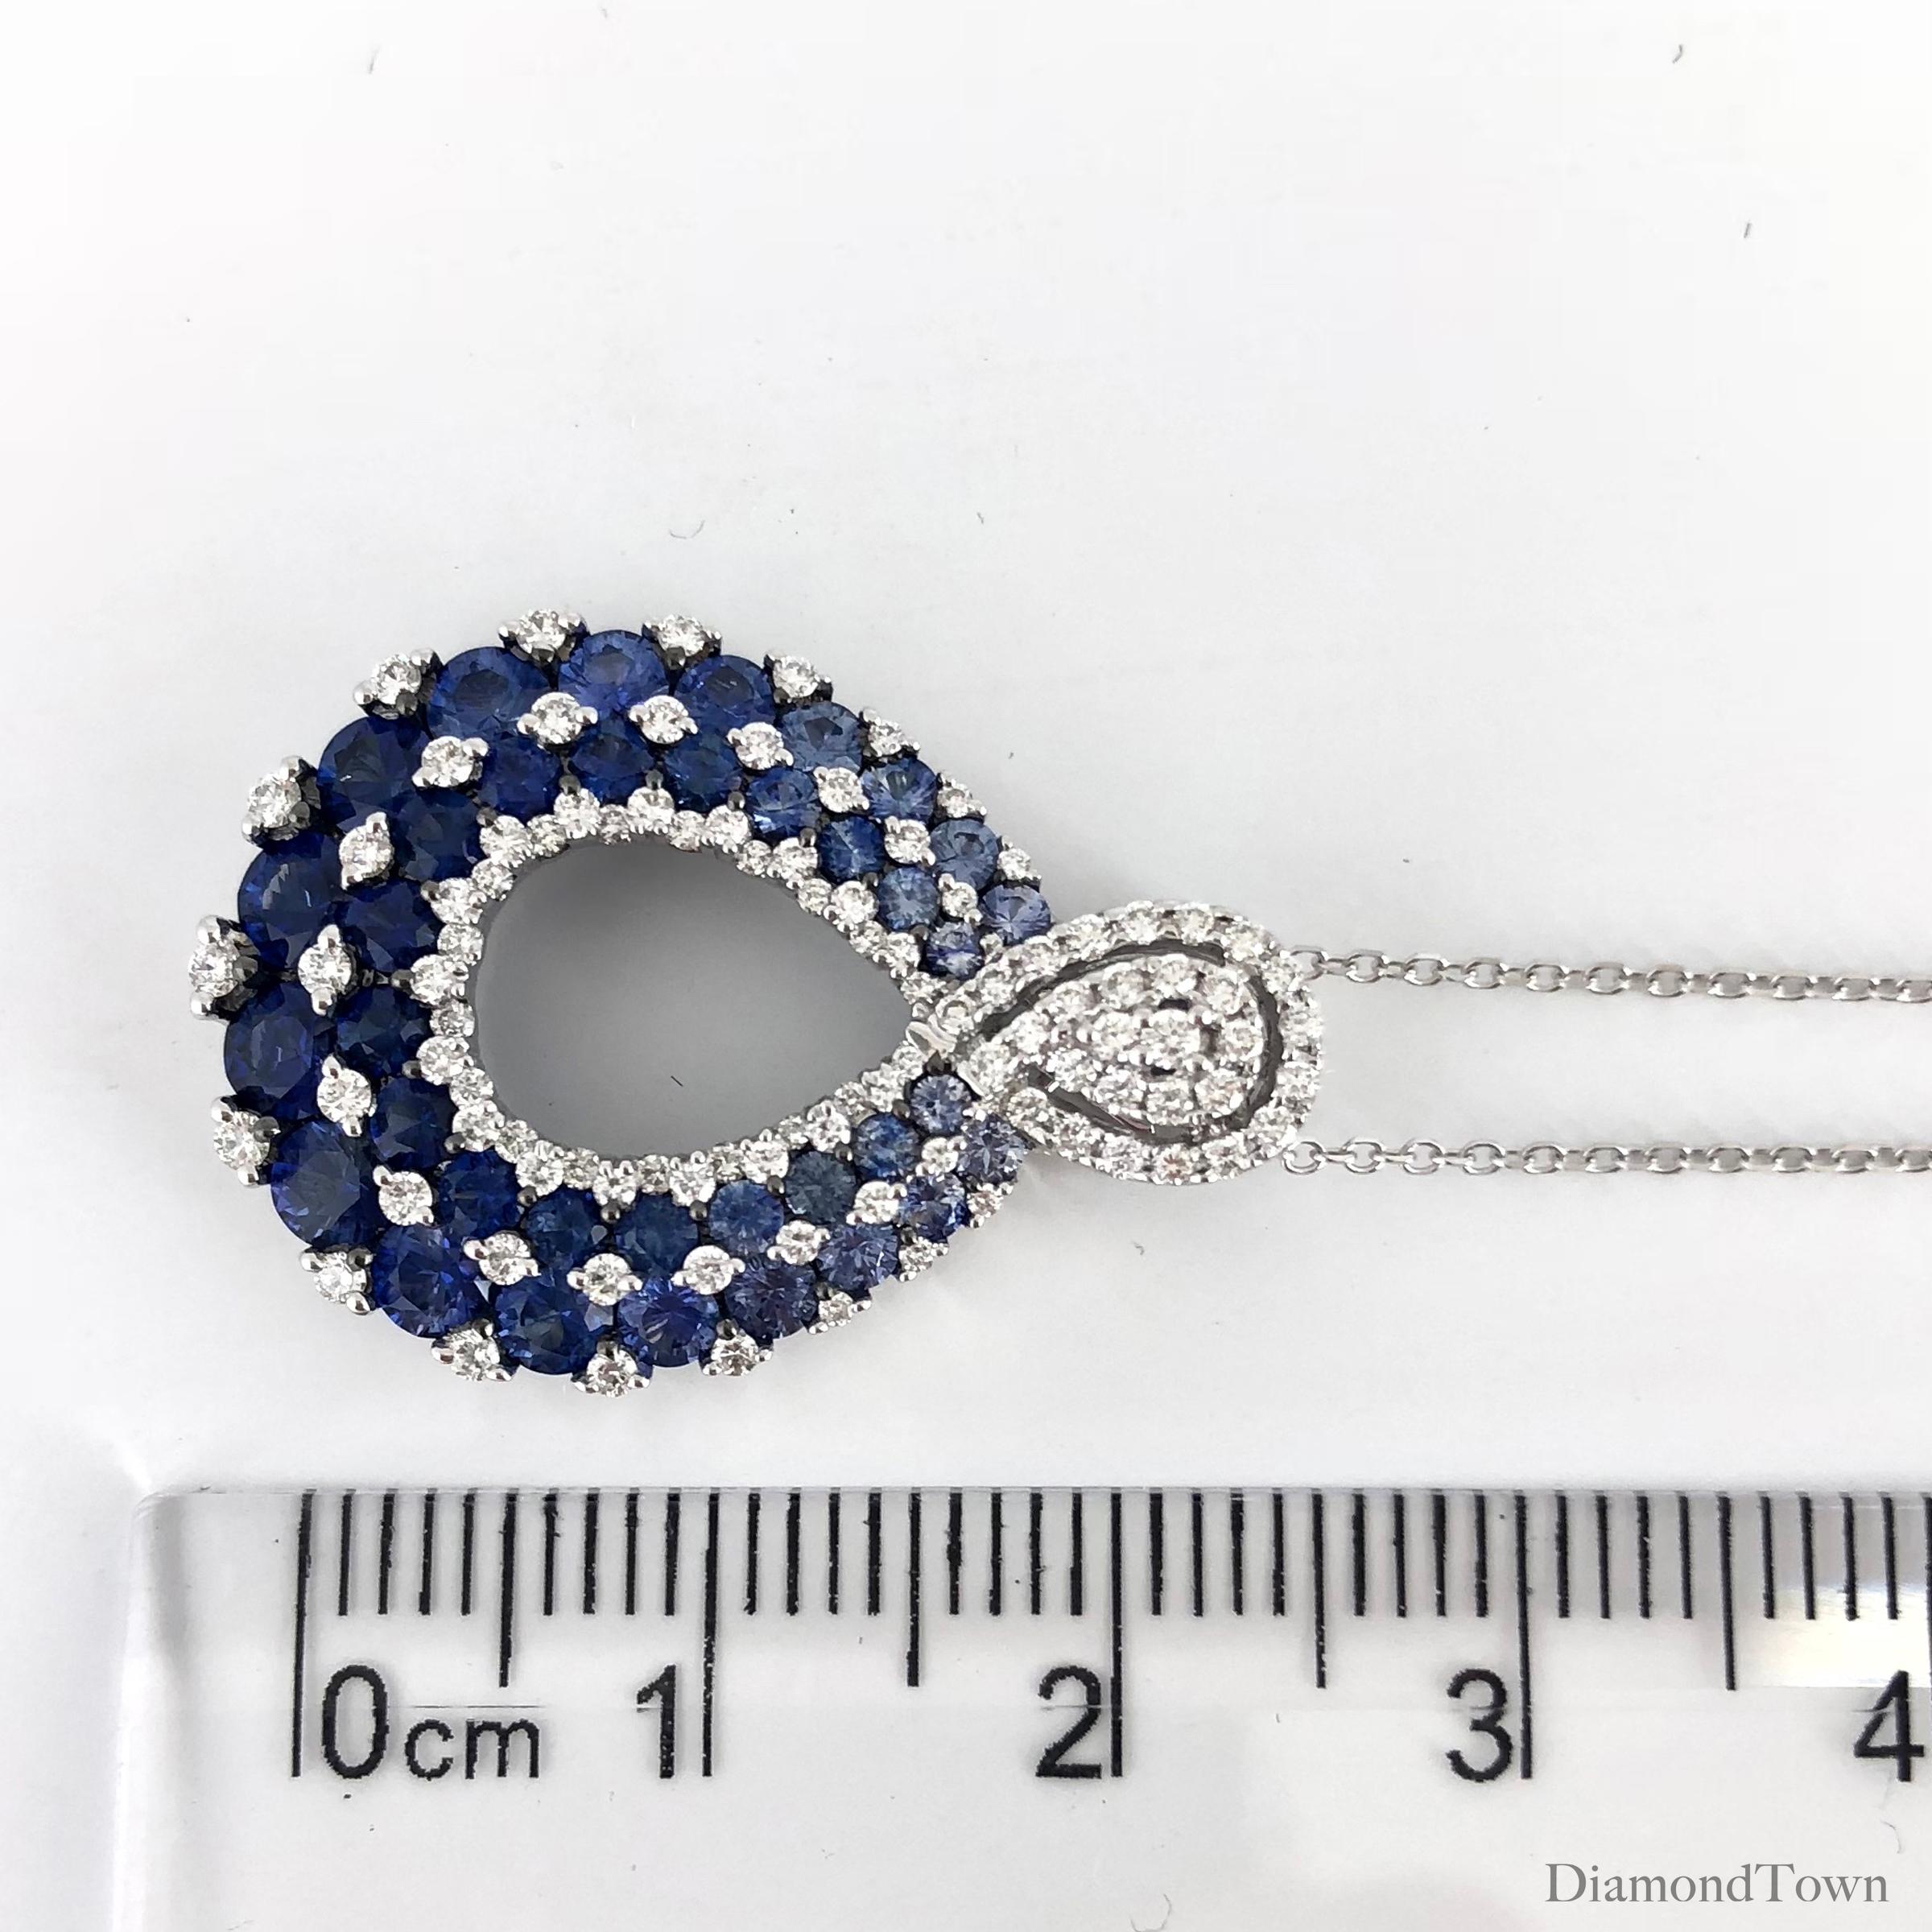 This stunning pendant features 2.20 carats round blue sapphires of graduated size, interlaced with 0.52 carats round natural white diamonds. The overall impression is the grand plumage of a peacock.

Two rows of sapphires total 2.20 carats.
Three